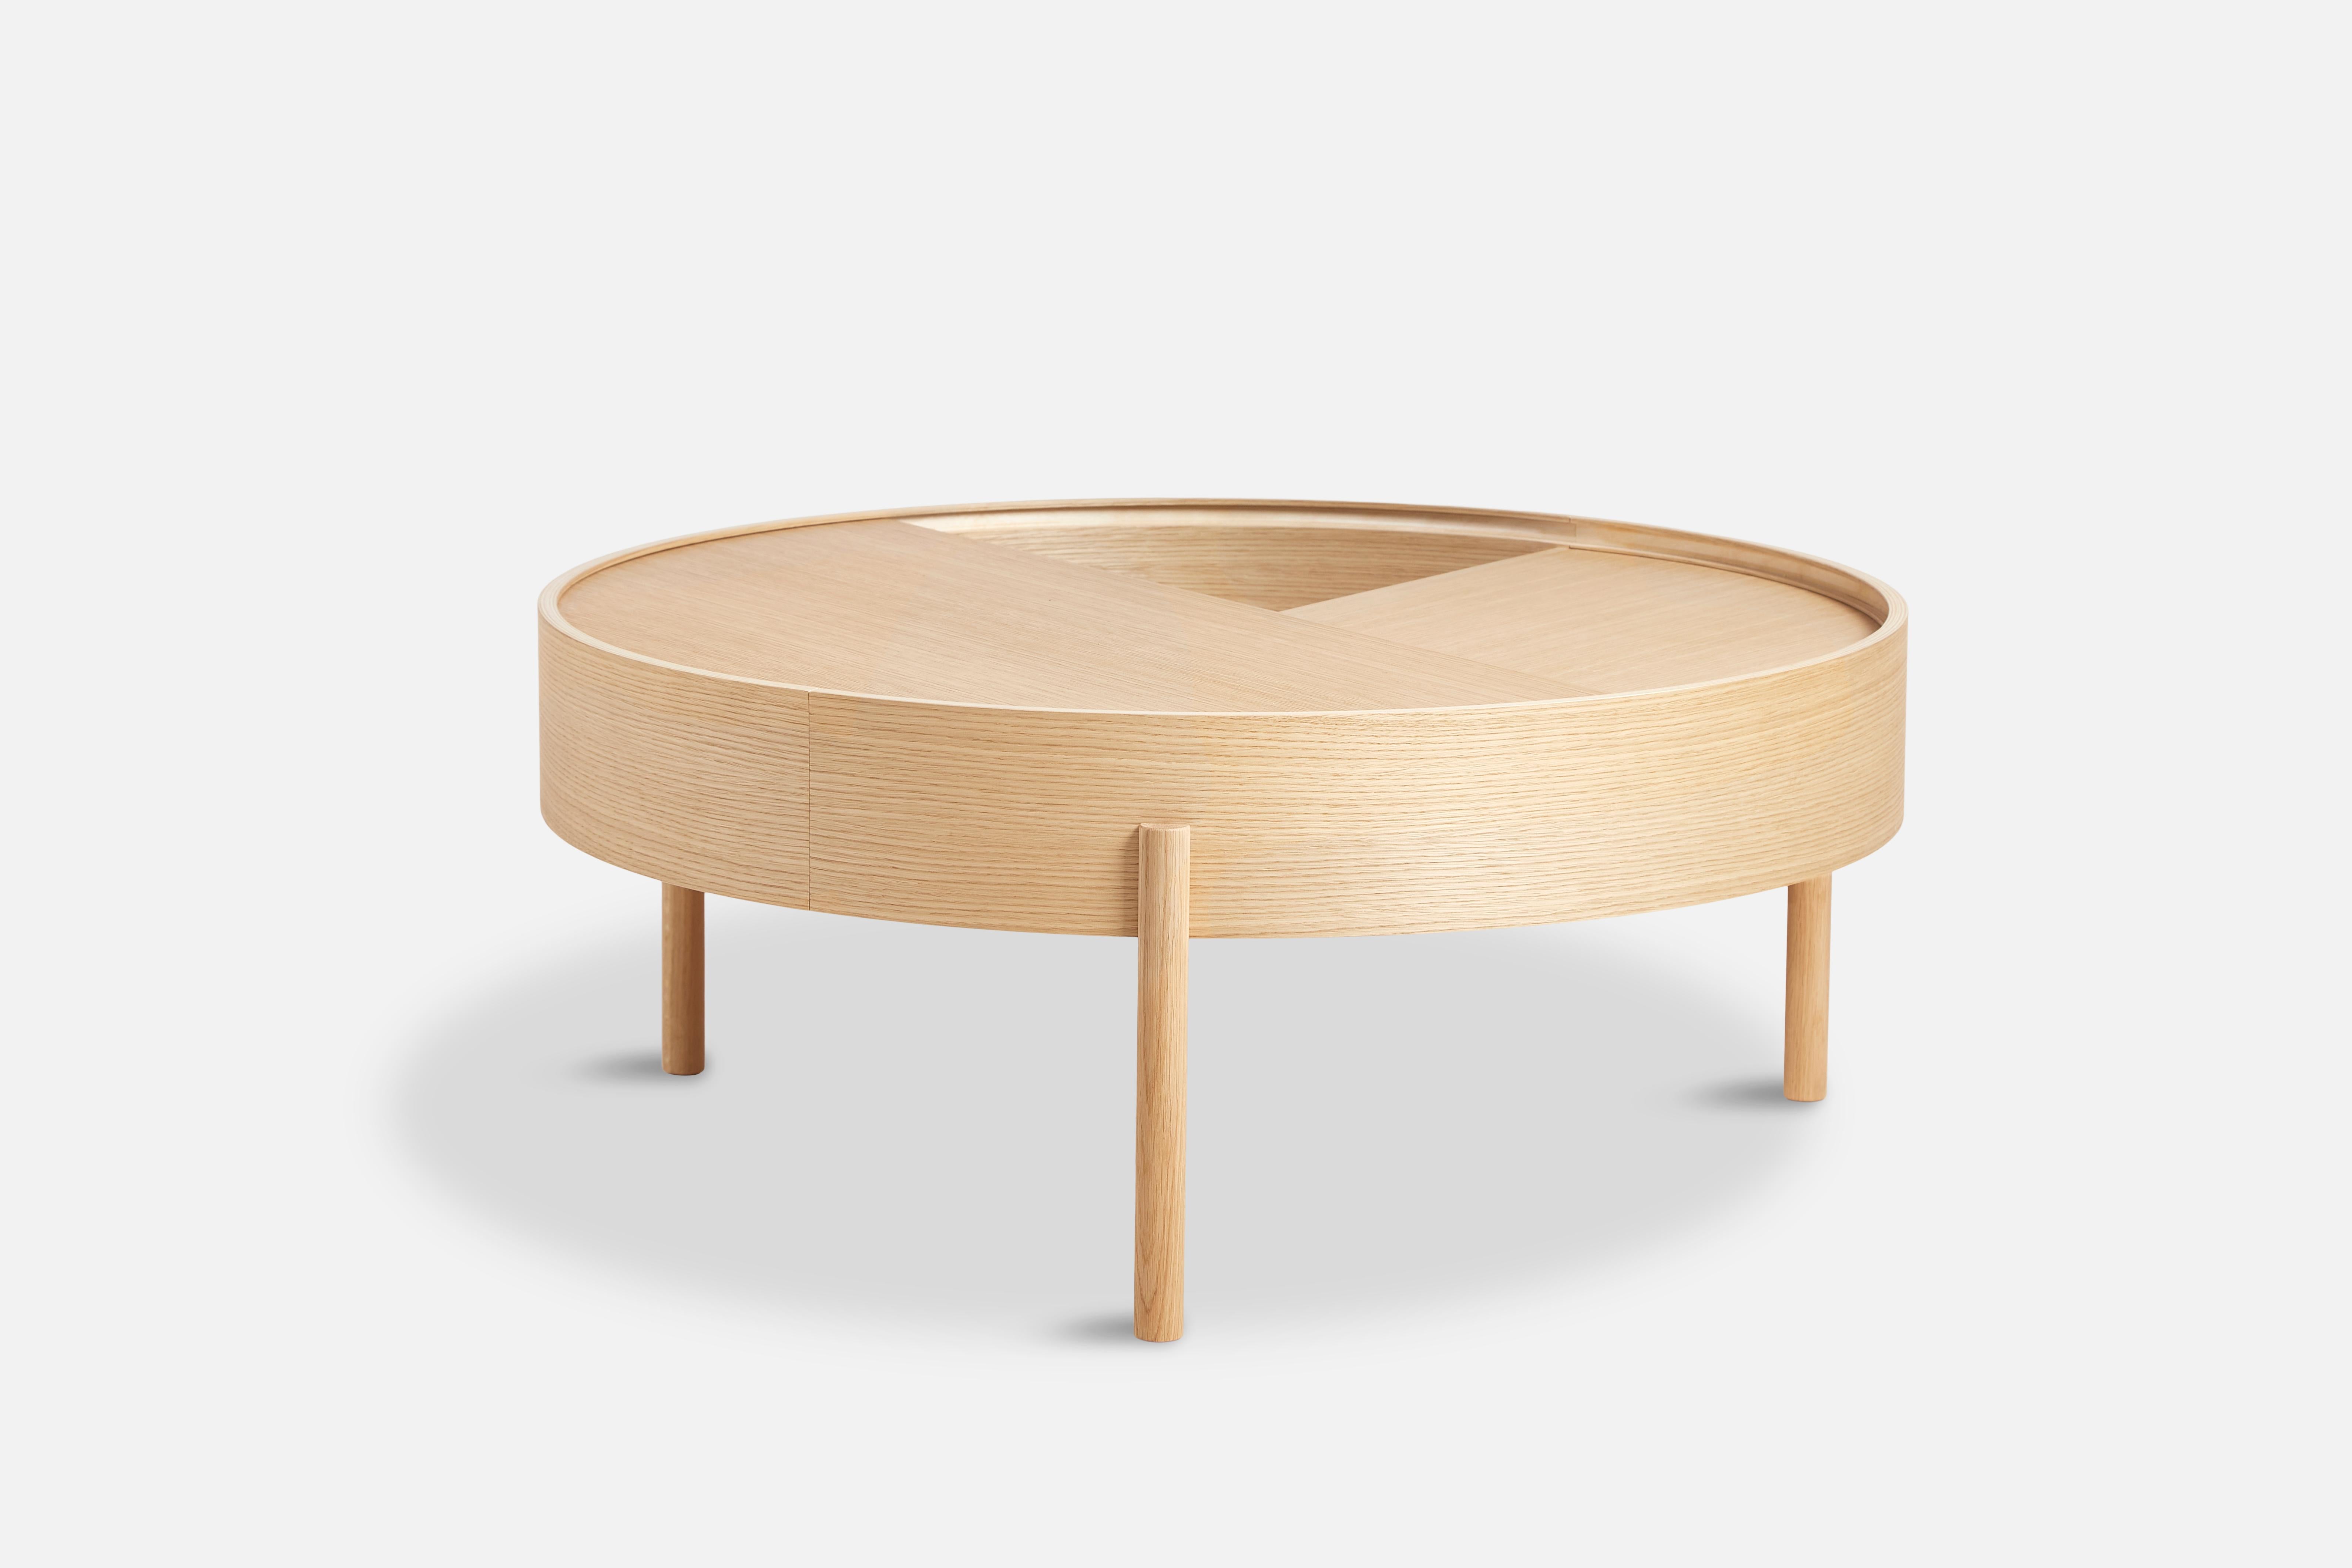 Oiled Oak Arc Coffee Table by Ditte Vad and Julie Bertrup
Materials: Oak, Laminate
Dimensions: D 89 x W 89 x H 38 cm
Also available in different sizes and materials: Ash, Oak, Walnut venner with solid Ash,Oak, Walnut legs. Please contact us.